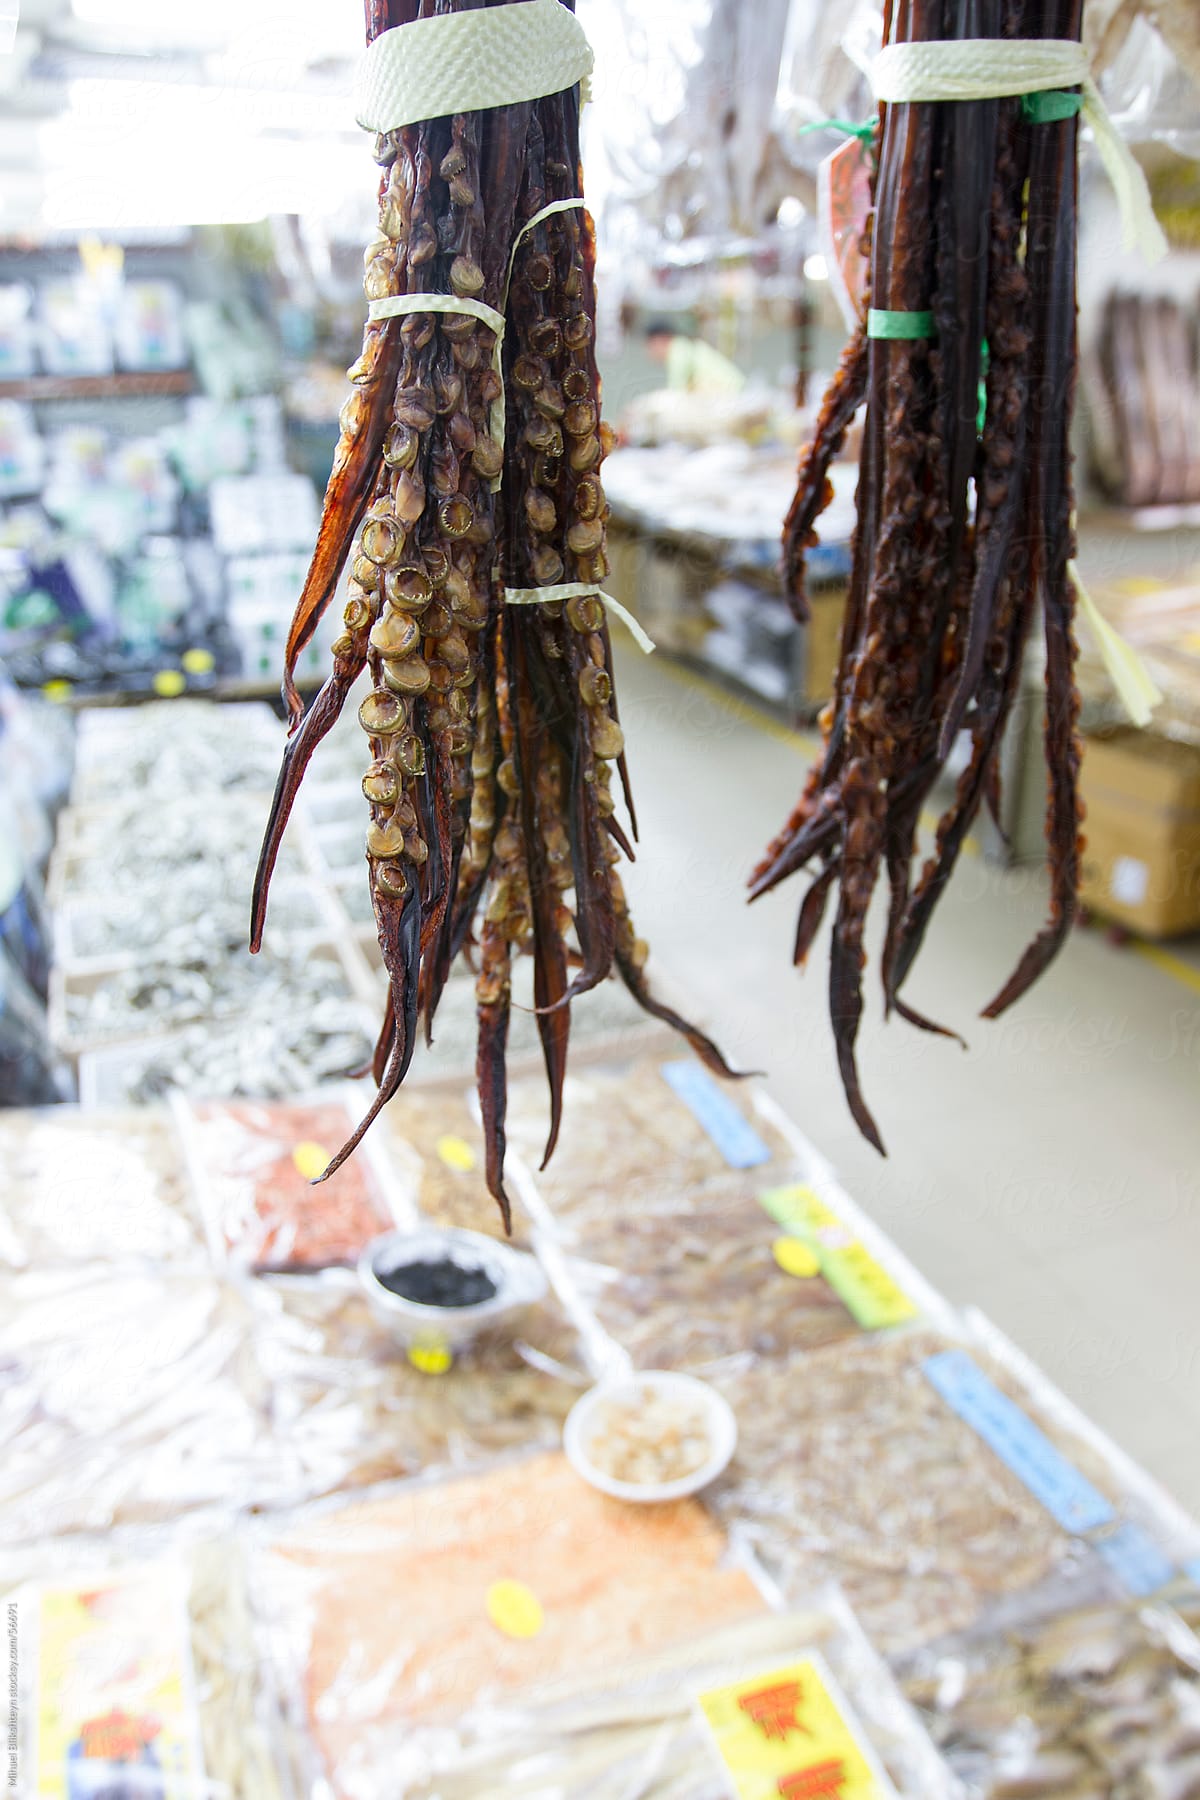 Dried octopus arms for sale at Asian fish market